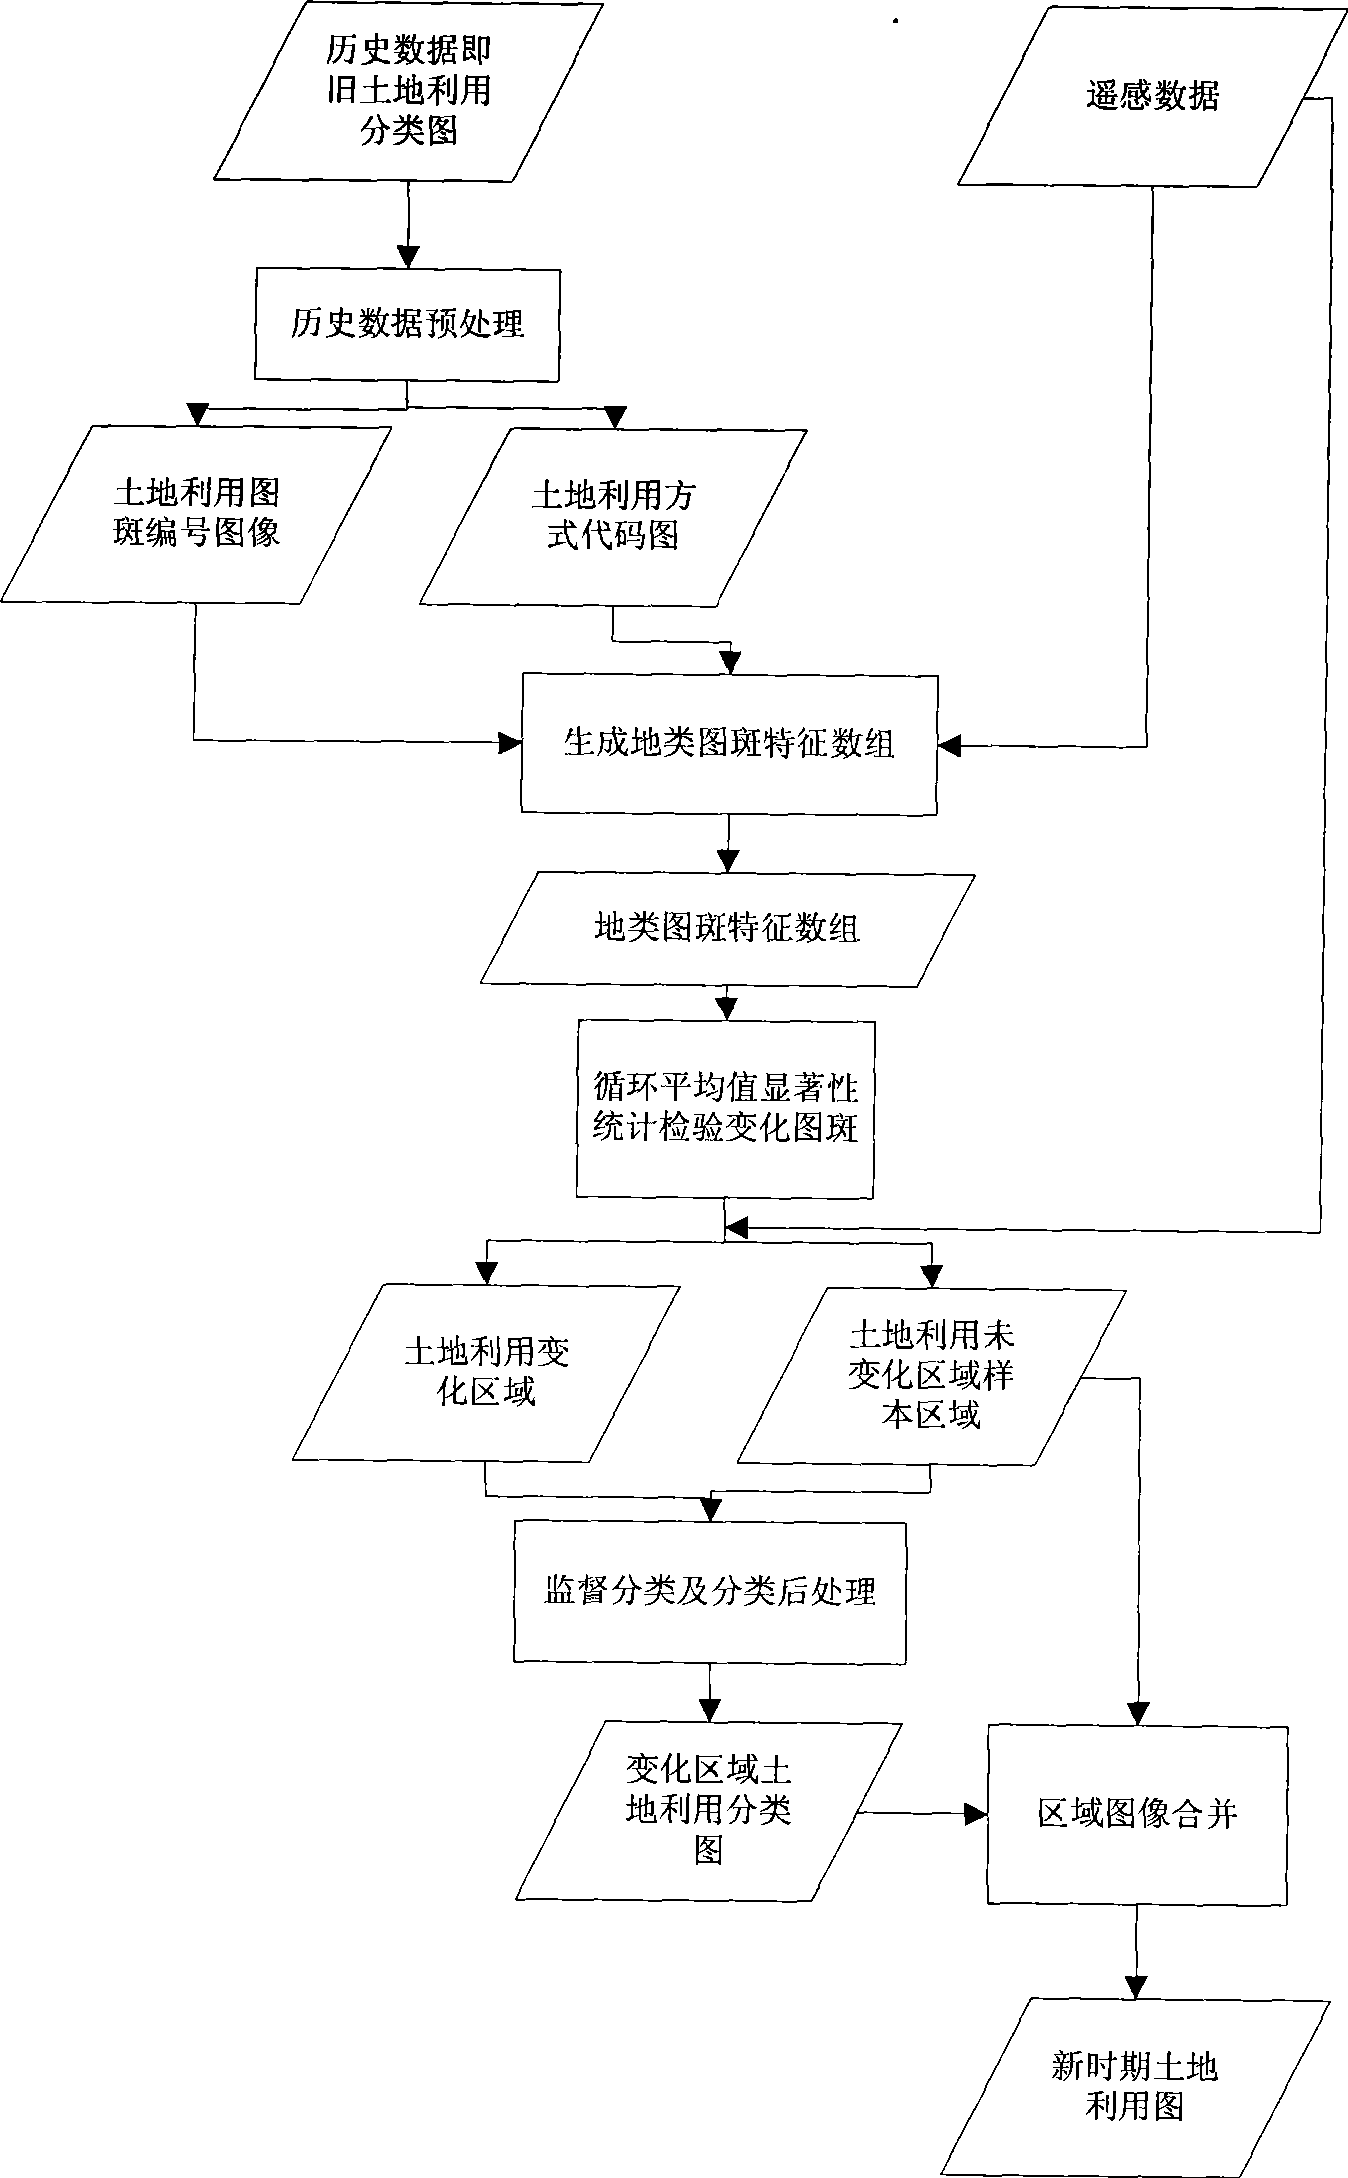 Method for automatically updating land-use map based on historical data and remote sensing data